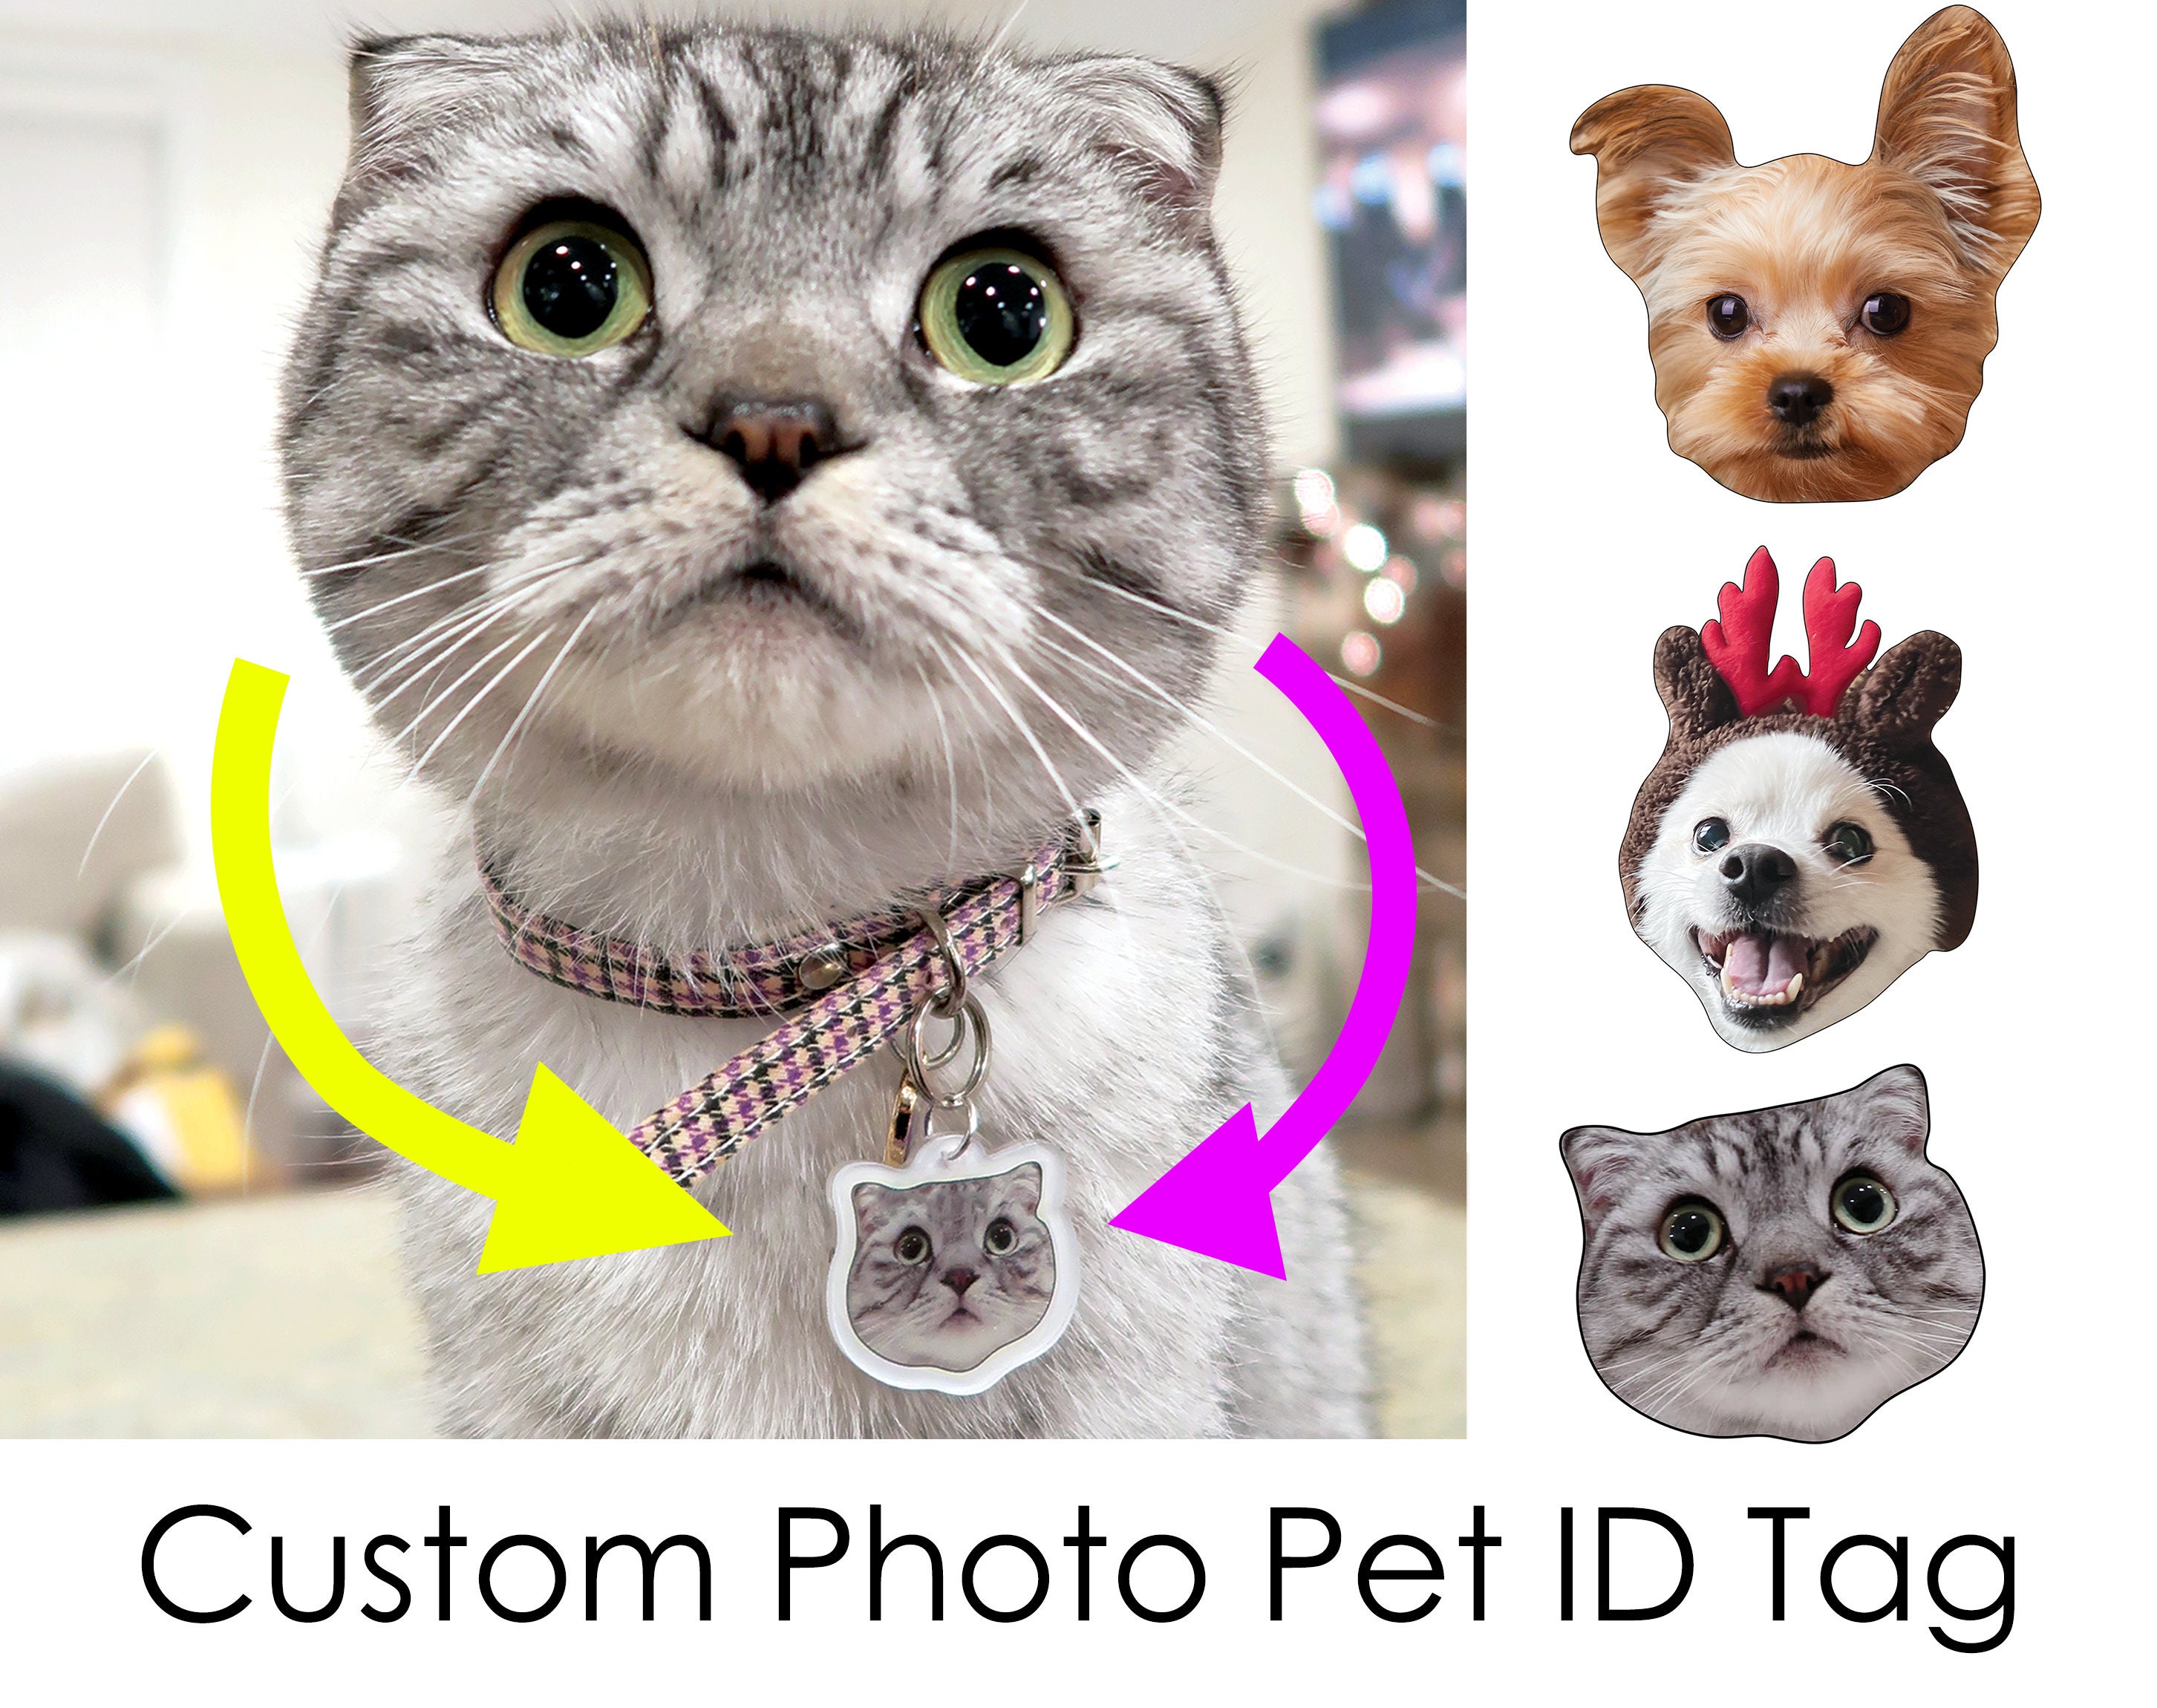 Cat Shaped Dog Cat Pet ID Tag Custom Engraved Acrylic Plastic 6 Colors & 3 Sizes to Choose From Message Seller with Engraving Information 